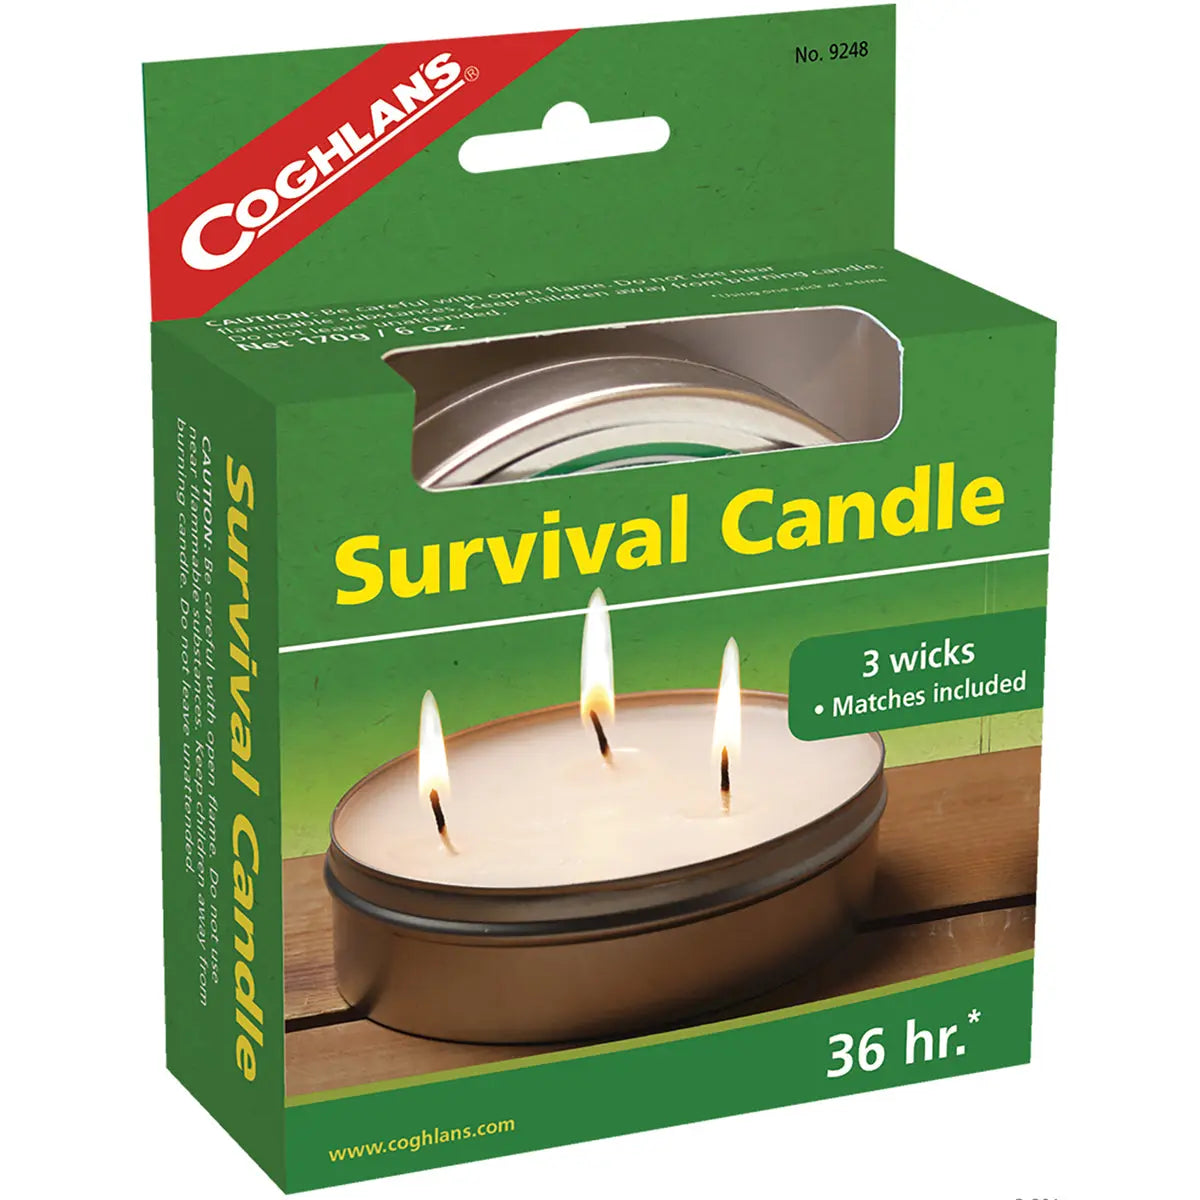 Coghlan's Survival Candle with 3 Wicks, Burns 36 Hours, Includes Camping Matches Coghlan's